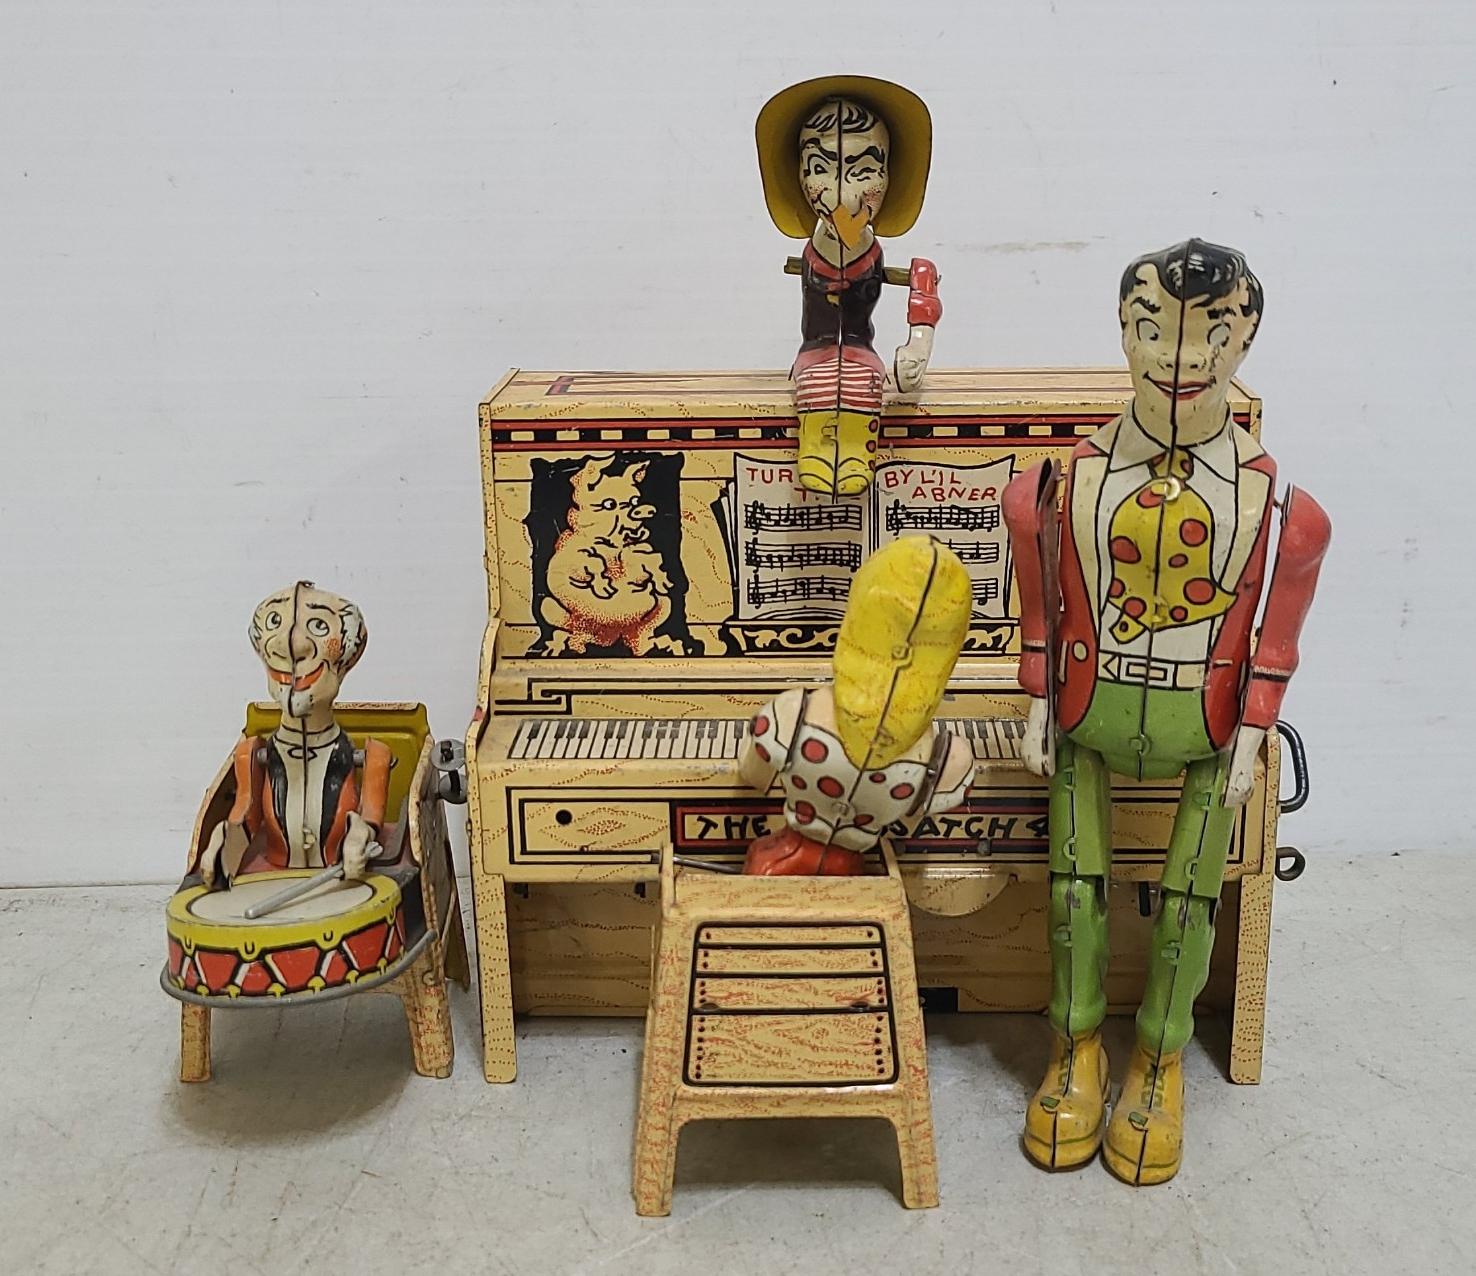 Unique Art L'il Abner Dogpatch Band Wind Up Tin Toy